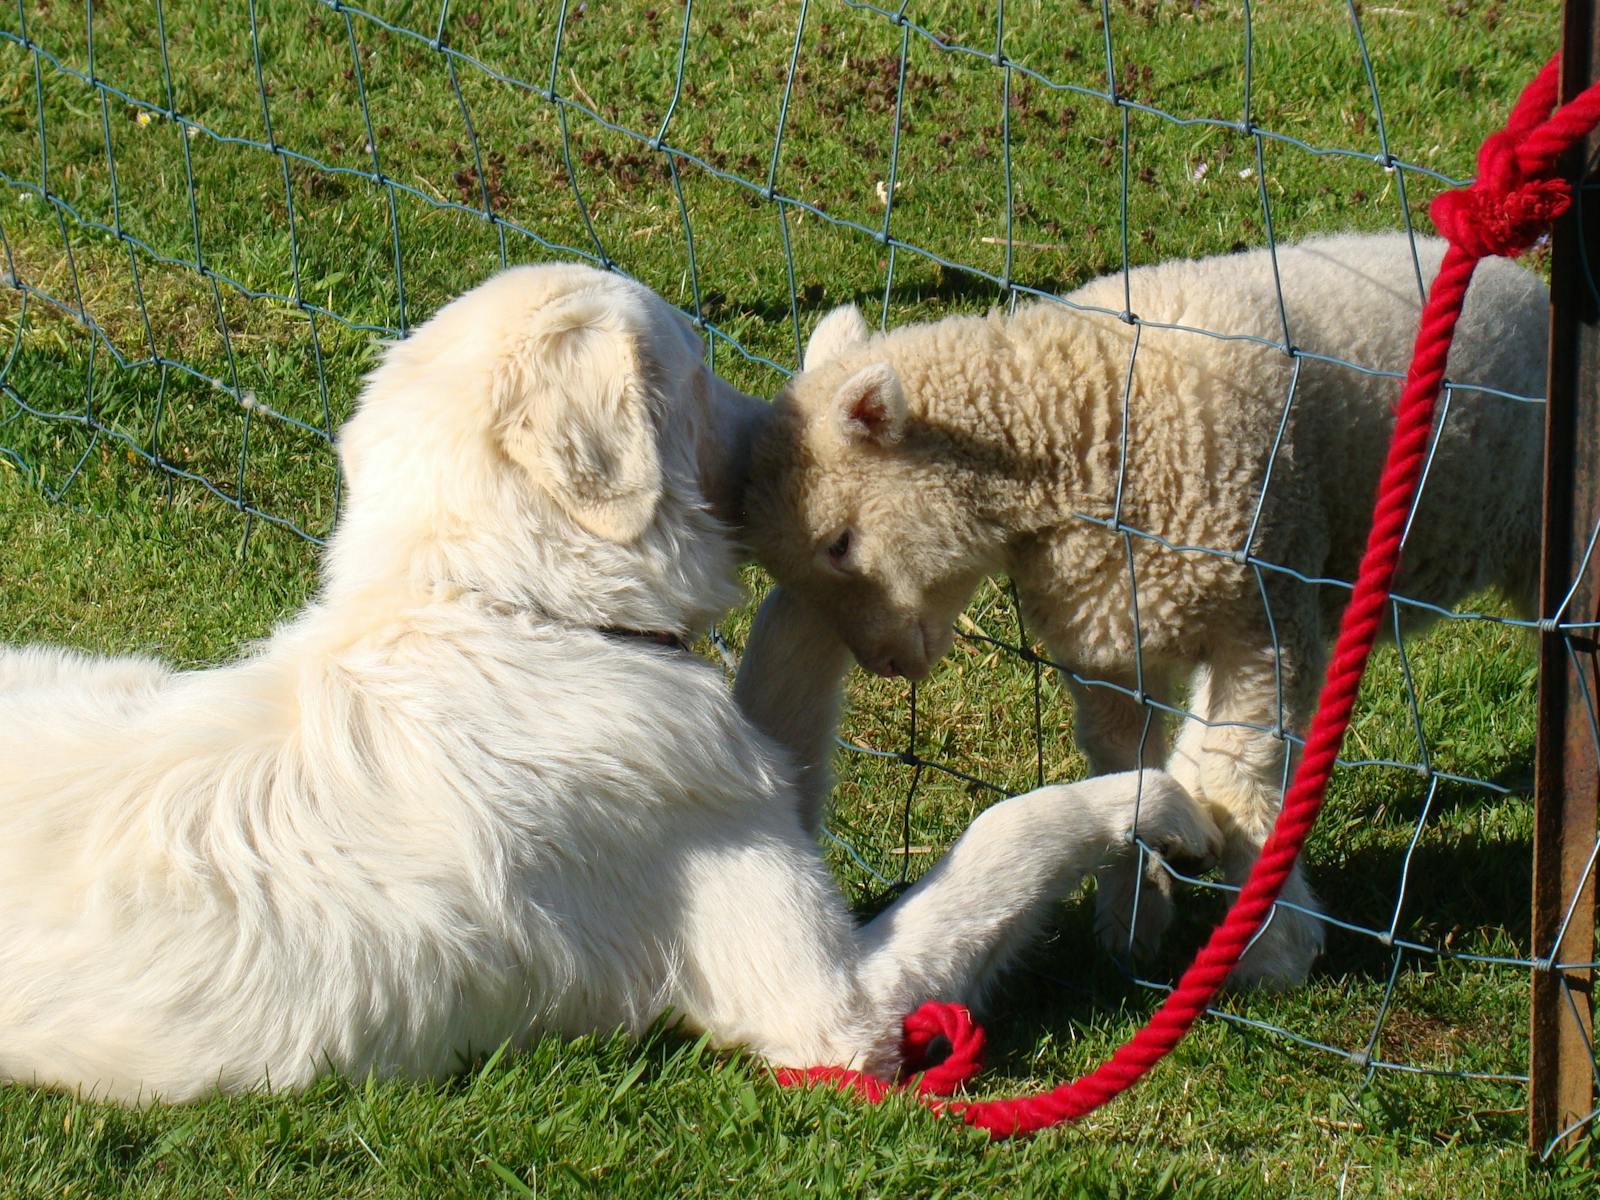 From  one pet to another, the farm Maremma and lamb share a moment of affection